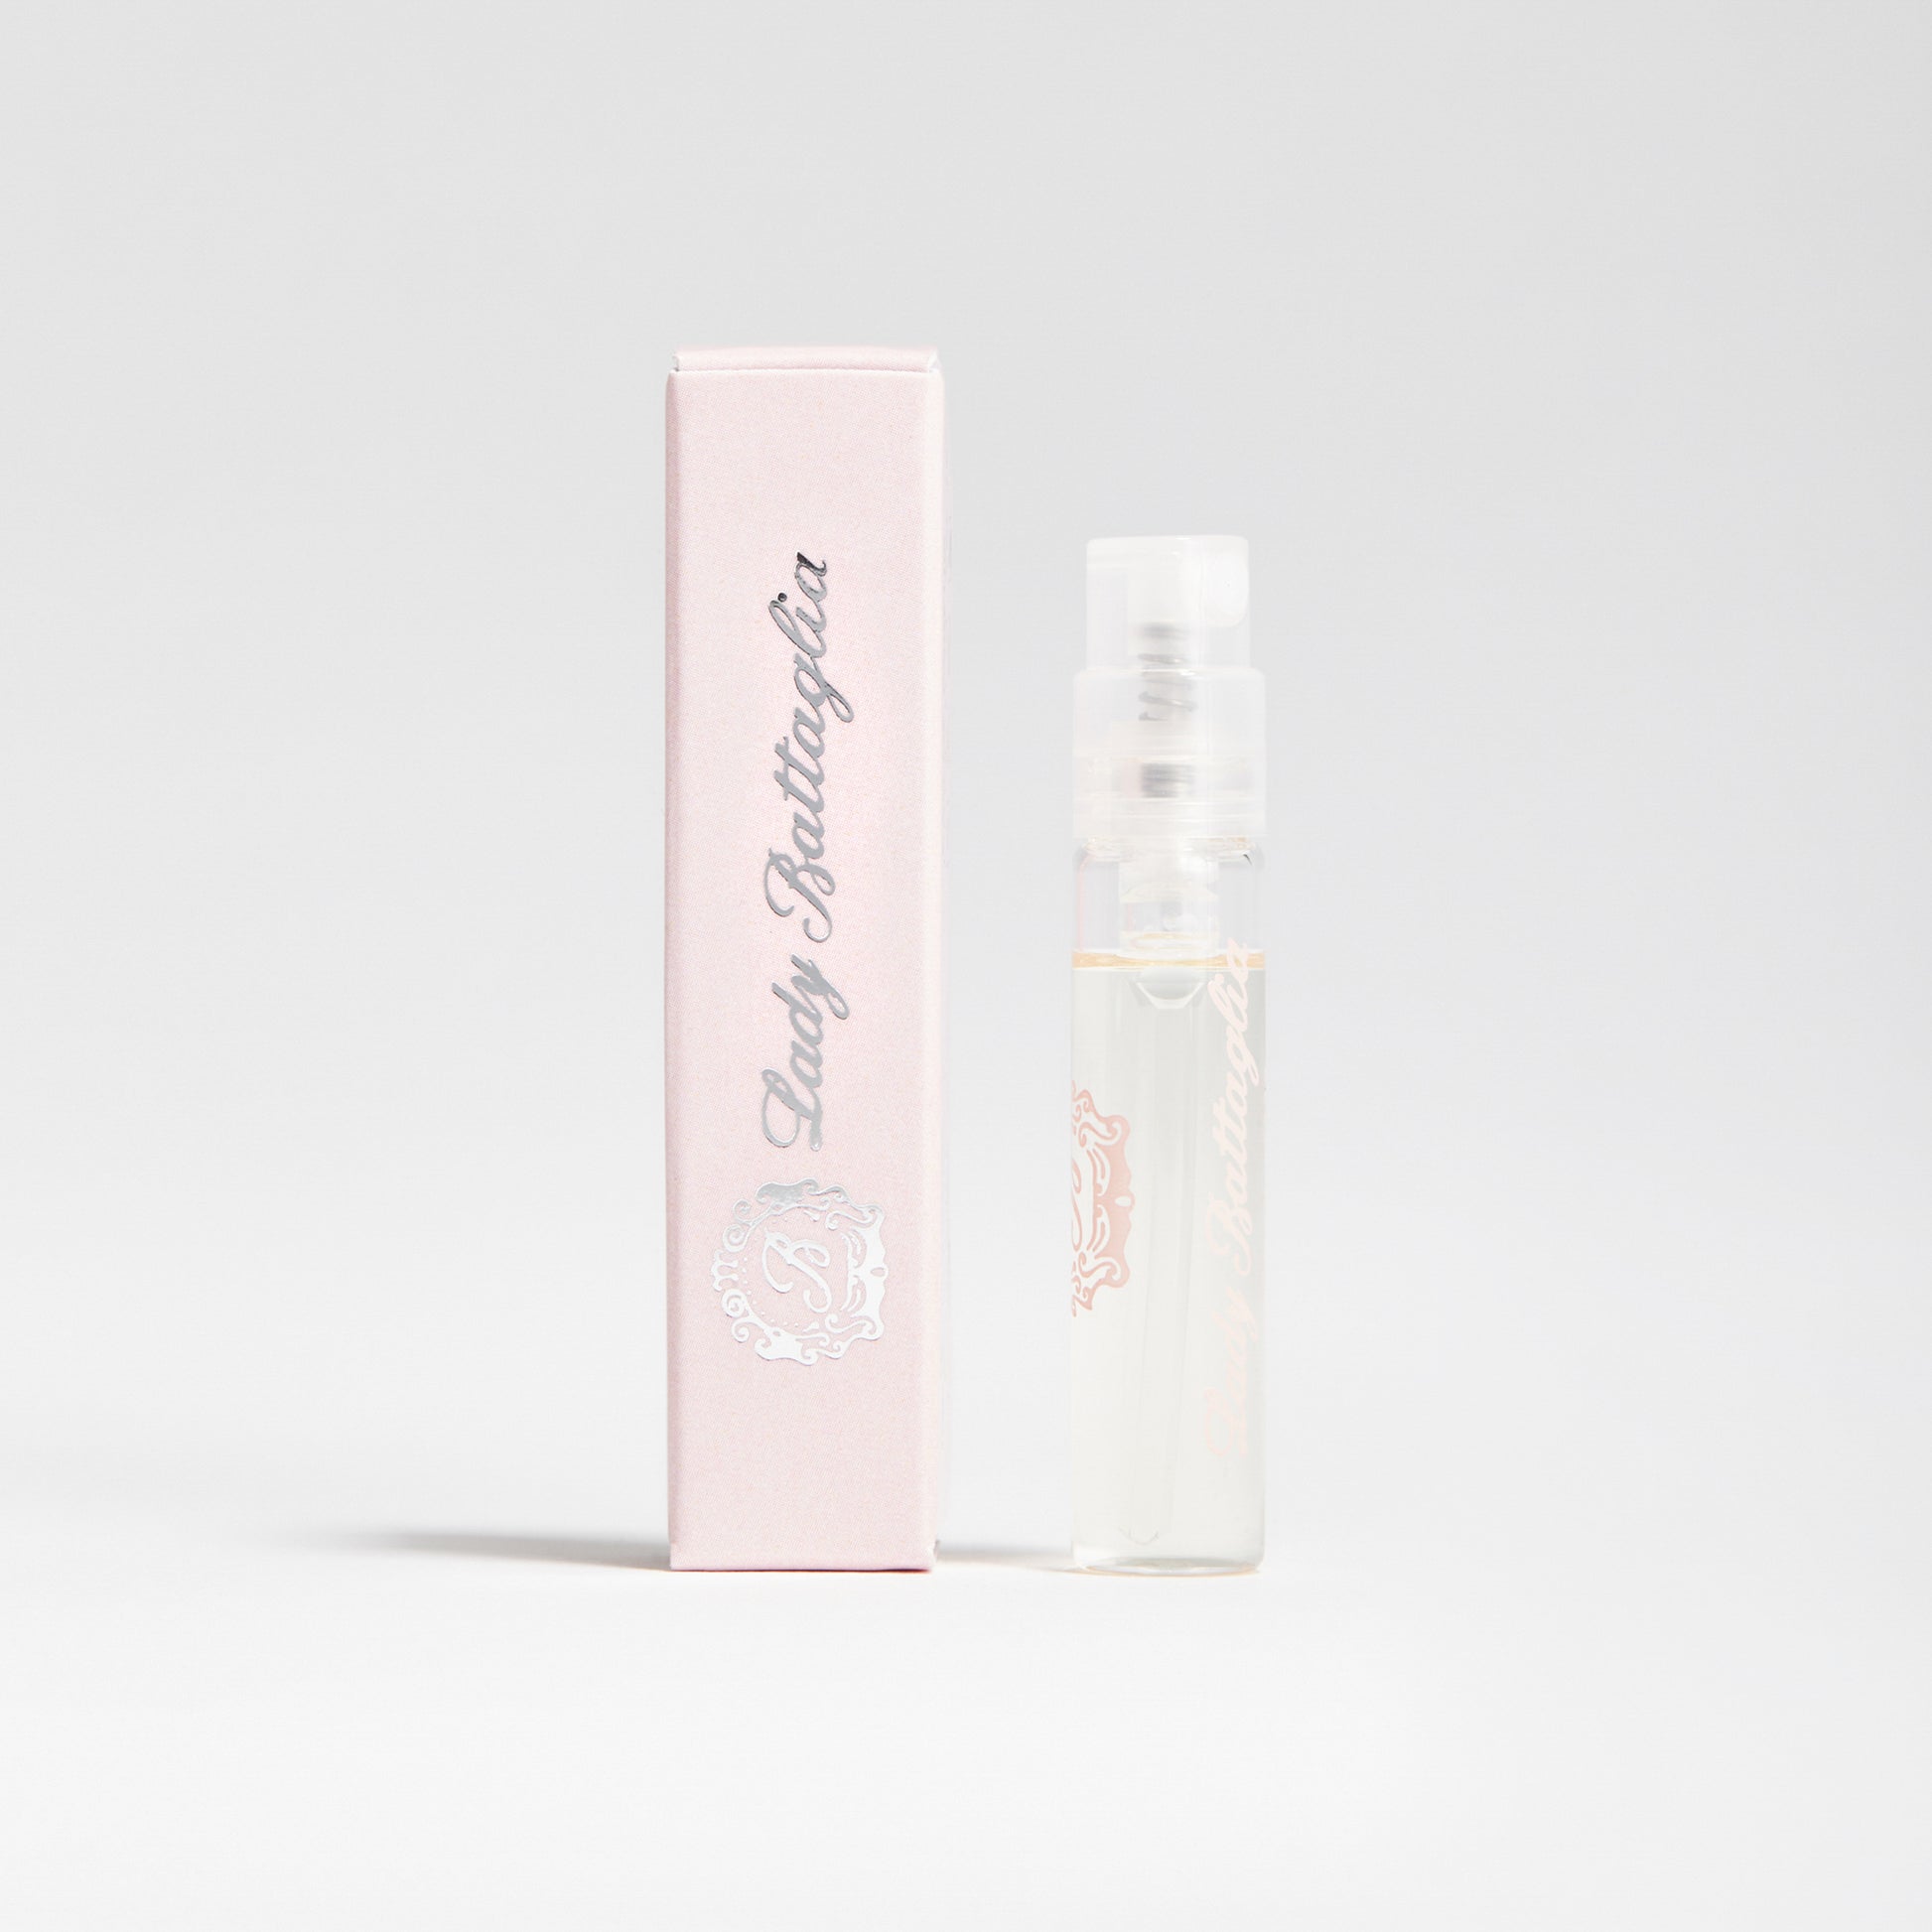 A photo of the Lady Battaglia fragrance sample by Battaglia. The sample is standing upright next to the pink box it is packaged in against a white background. 